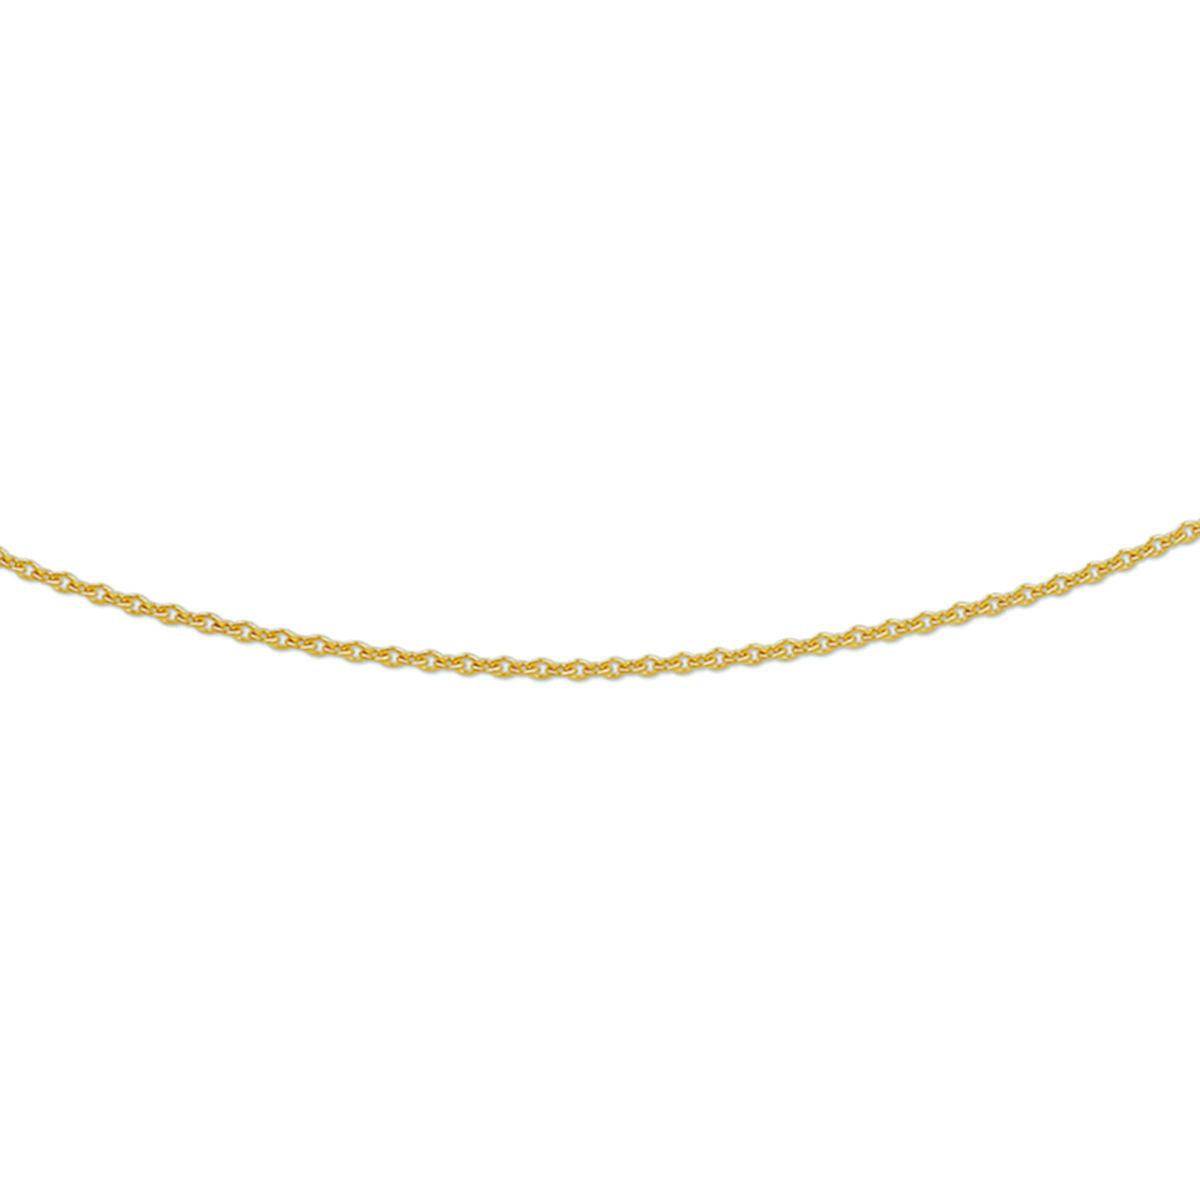 COLLIER ANKER ROND 1,2 MM 14K GEELGOUD - 40.16361